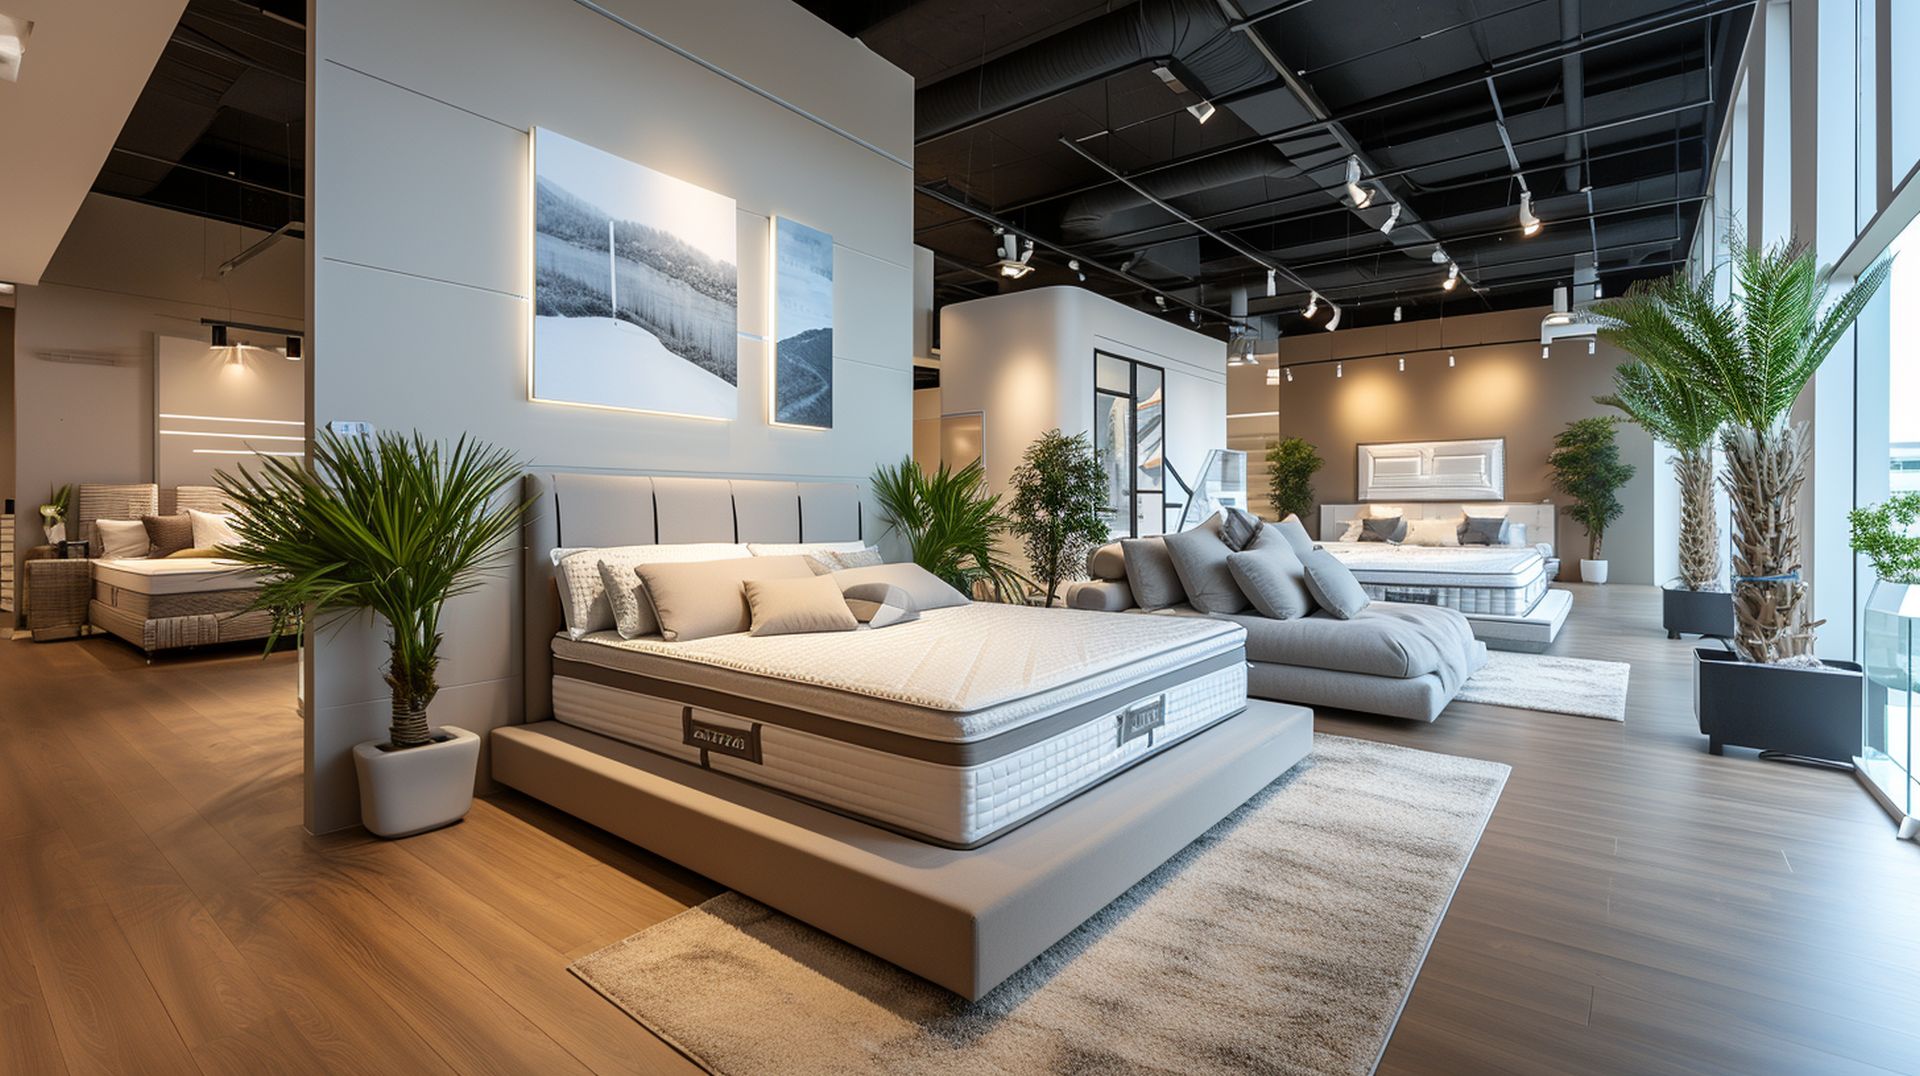 If you're looking for a new bed, mattress stores in Blue Springs offer the best customer and delivery service, financing, and warranties in Missouri